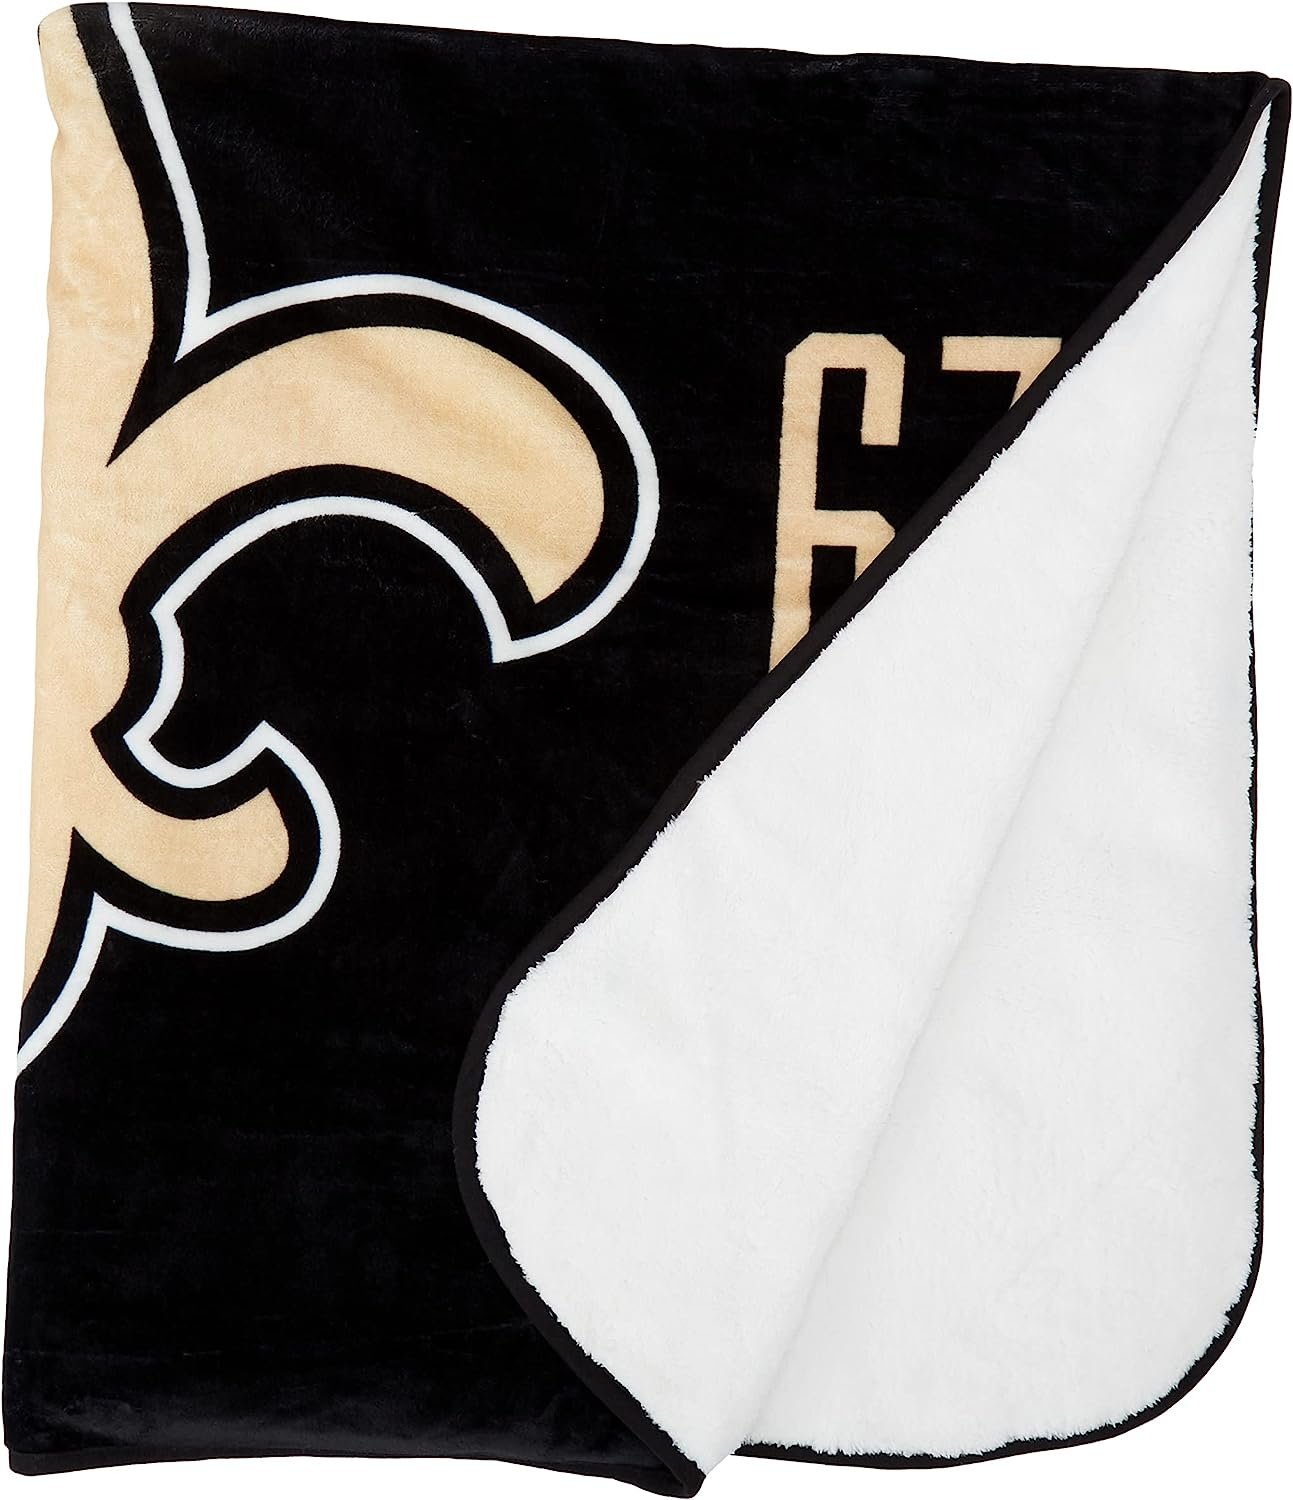 New Orleans Saints Throw Blanket, Sherpa Silk Touch Design, Motion Style, 60x70 Inch, Unisex Adult